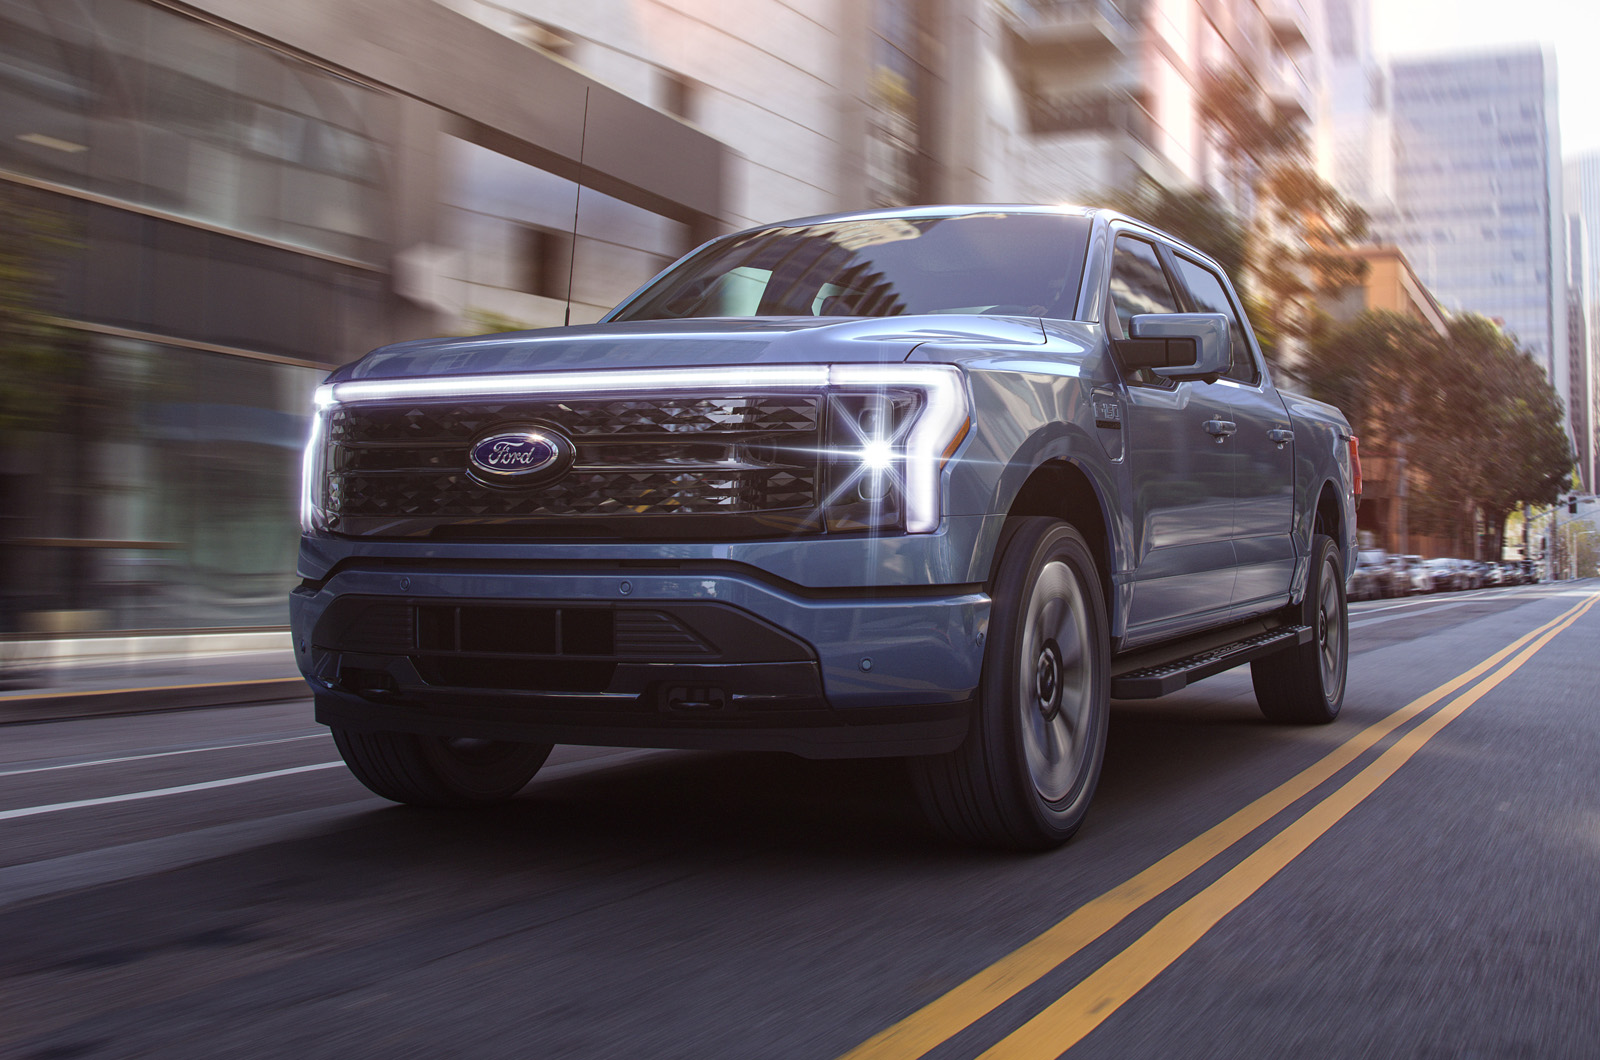 Ford F 150 Lightning Electric Truck Revealed Automotive Daily